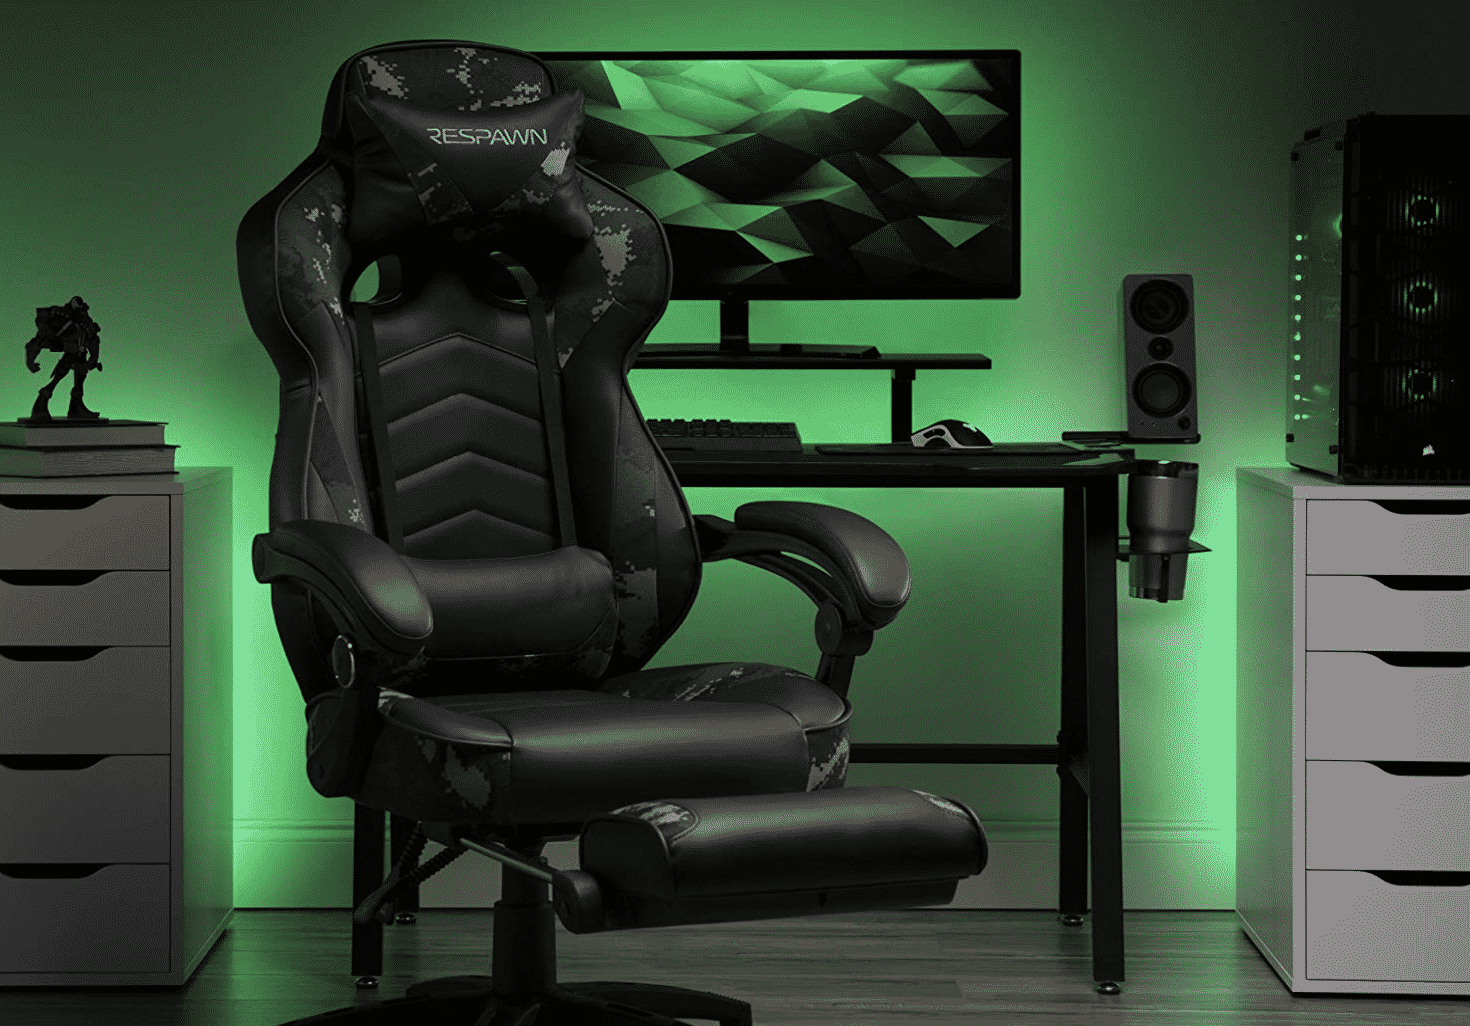 Camouflage-Designed Gaming Chair